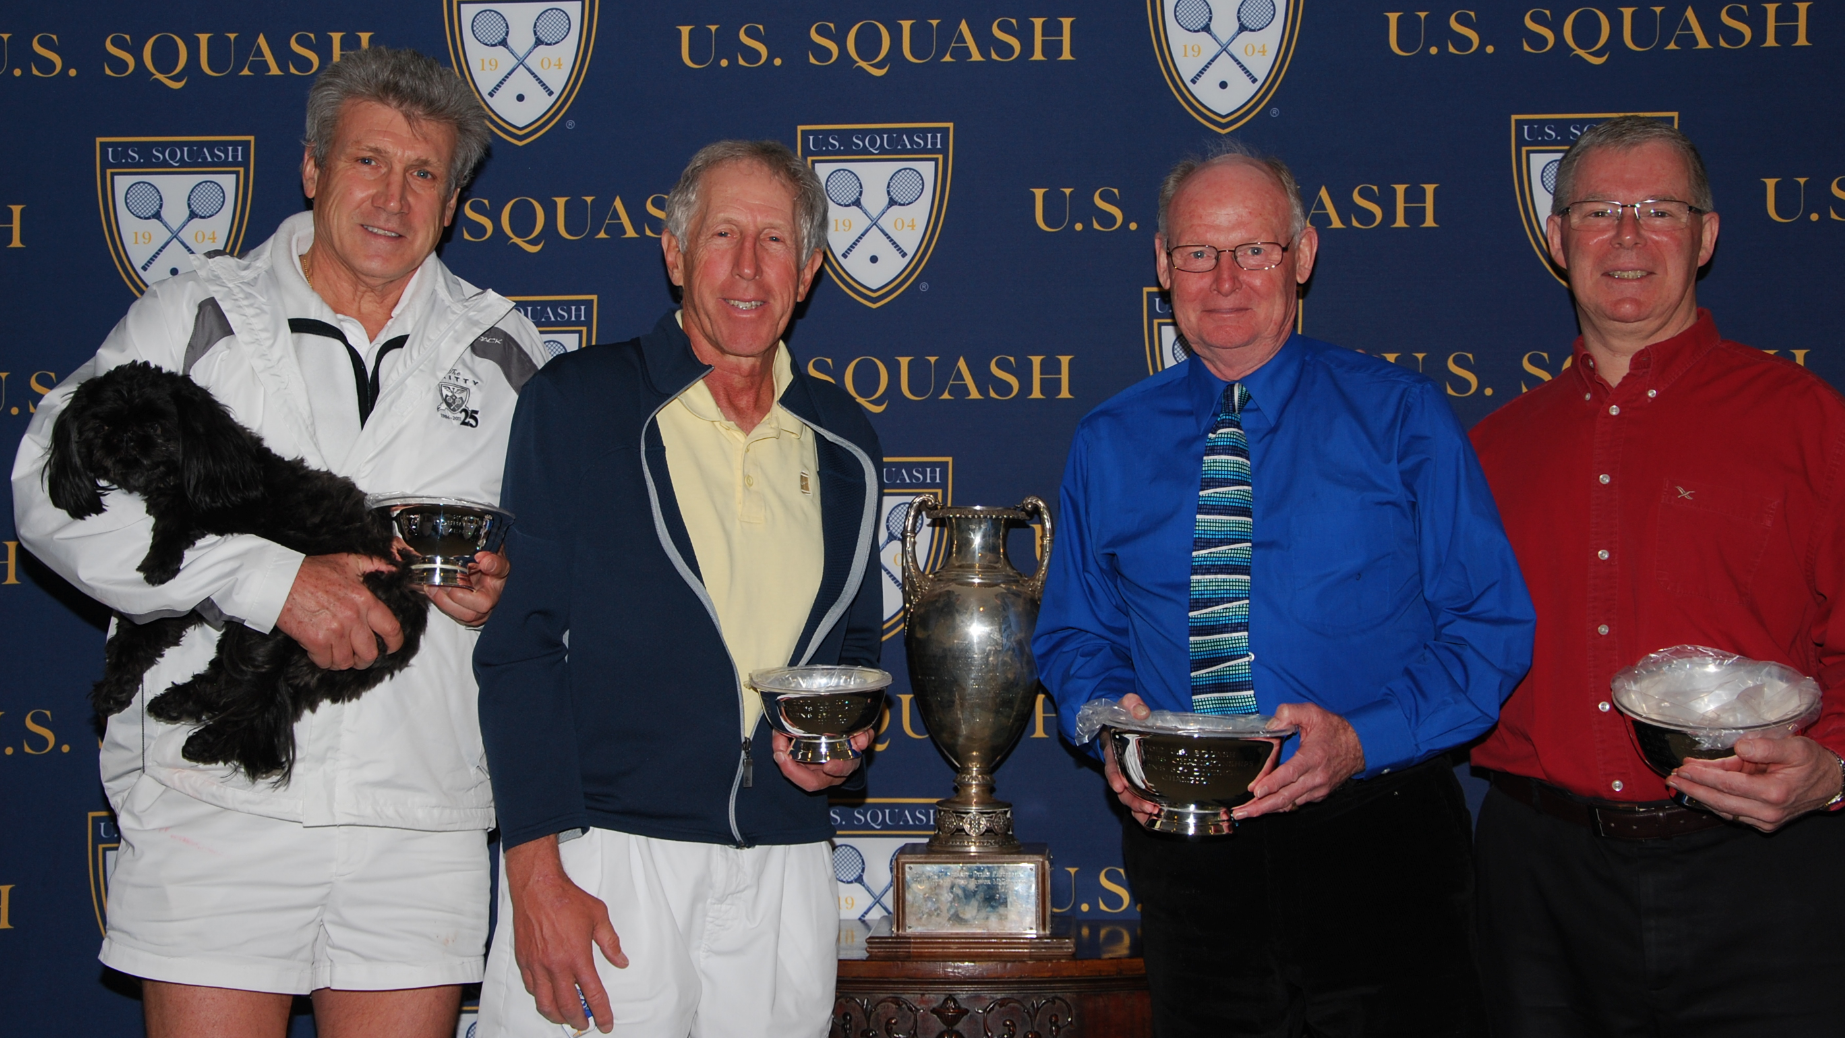 Despite pulling a hamstring in the third game, Molson Robertson (R) was able to recover with help from his partner Tony Swift to win in the Men's 65+ title over Tom Poor (L) and Lenny Bernheimer.